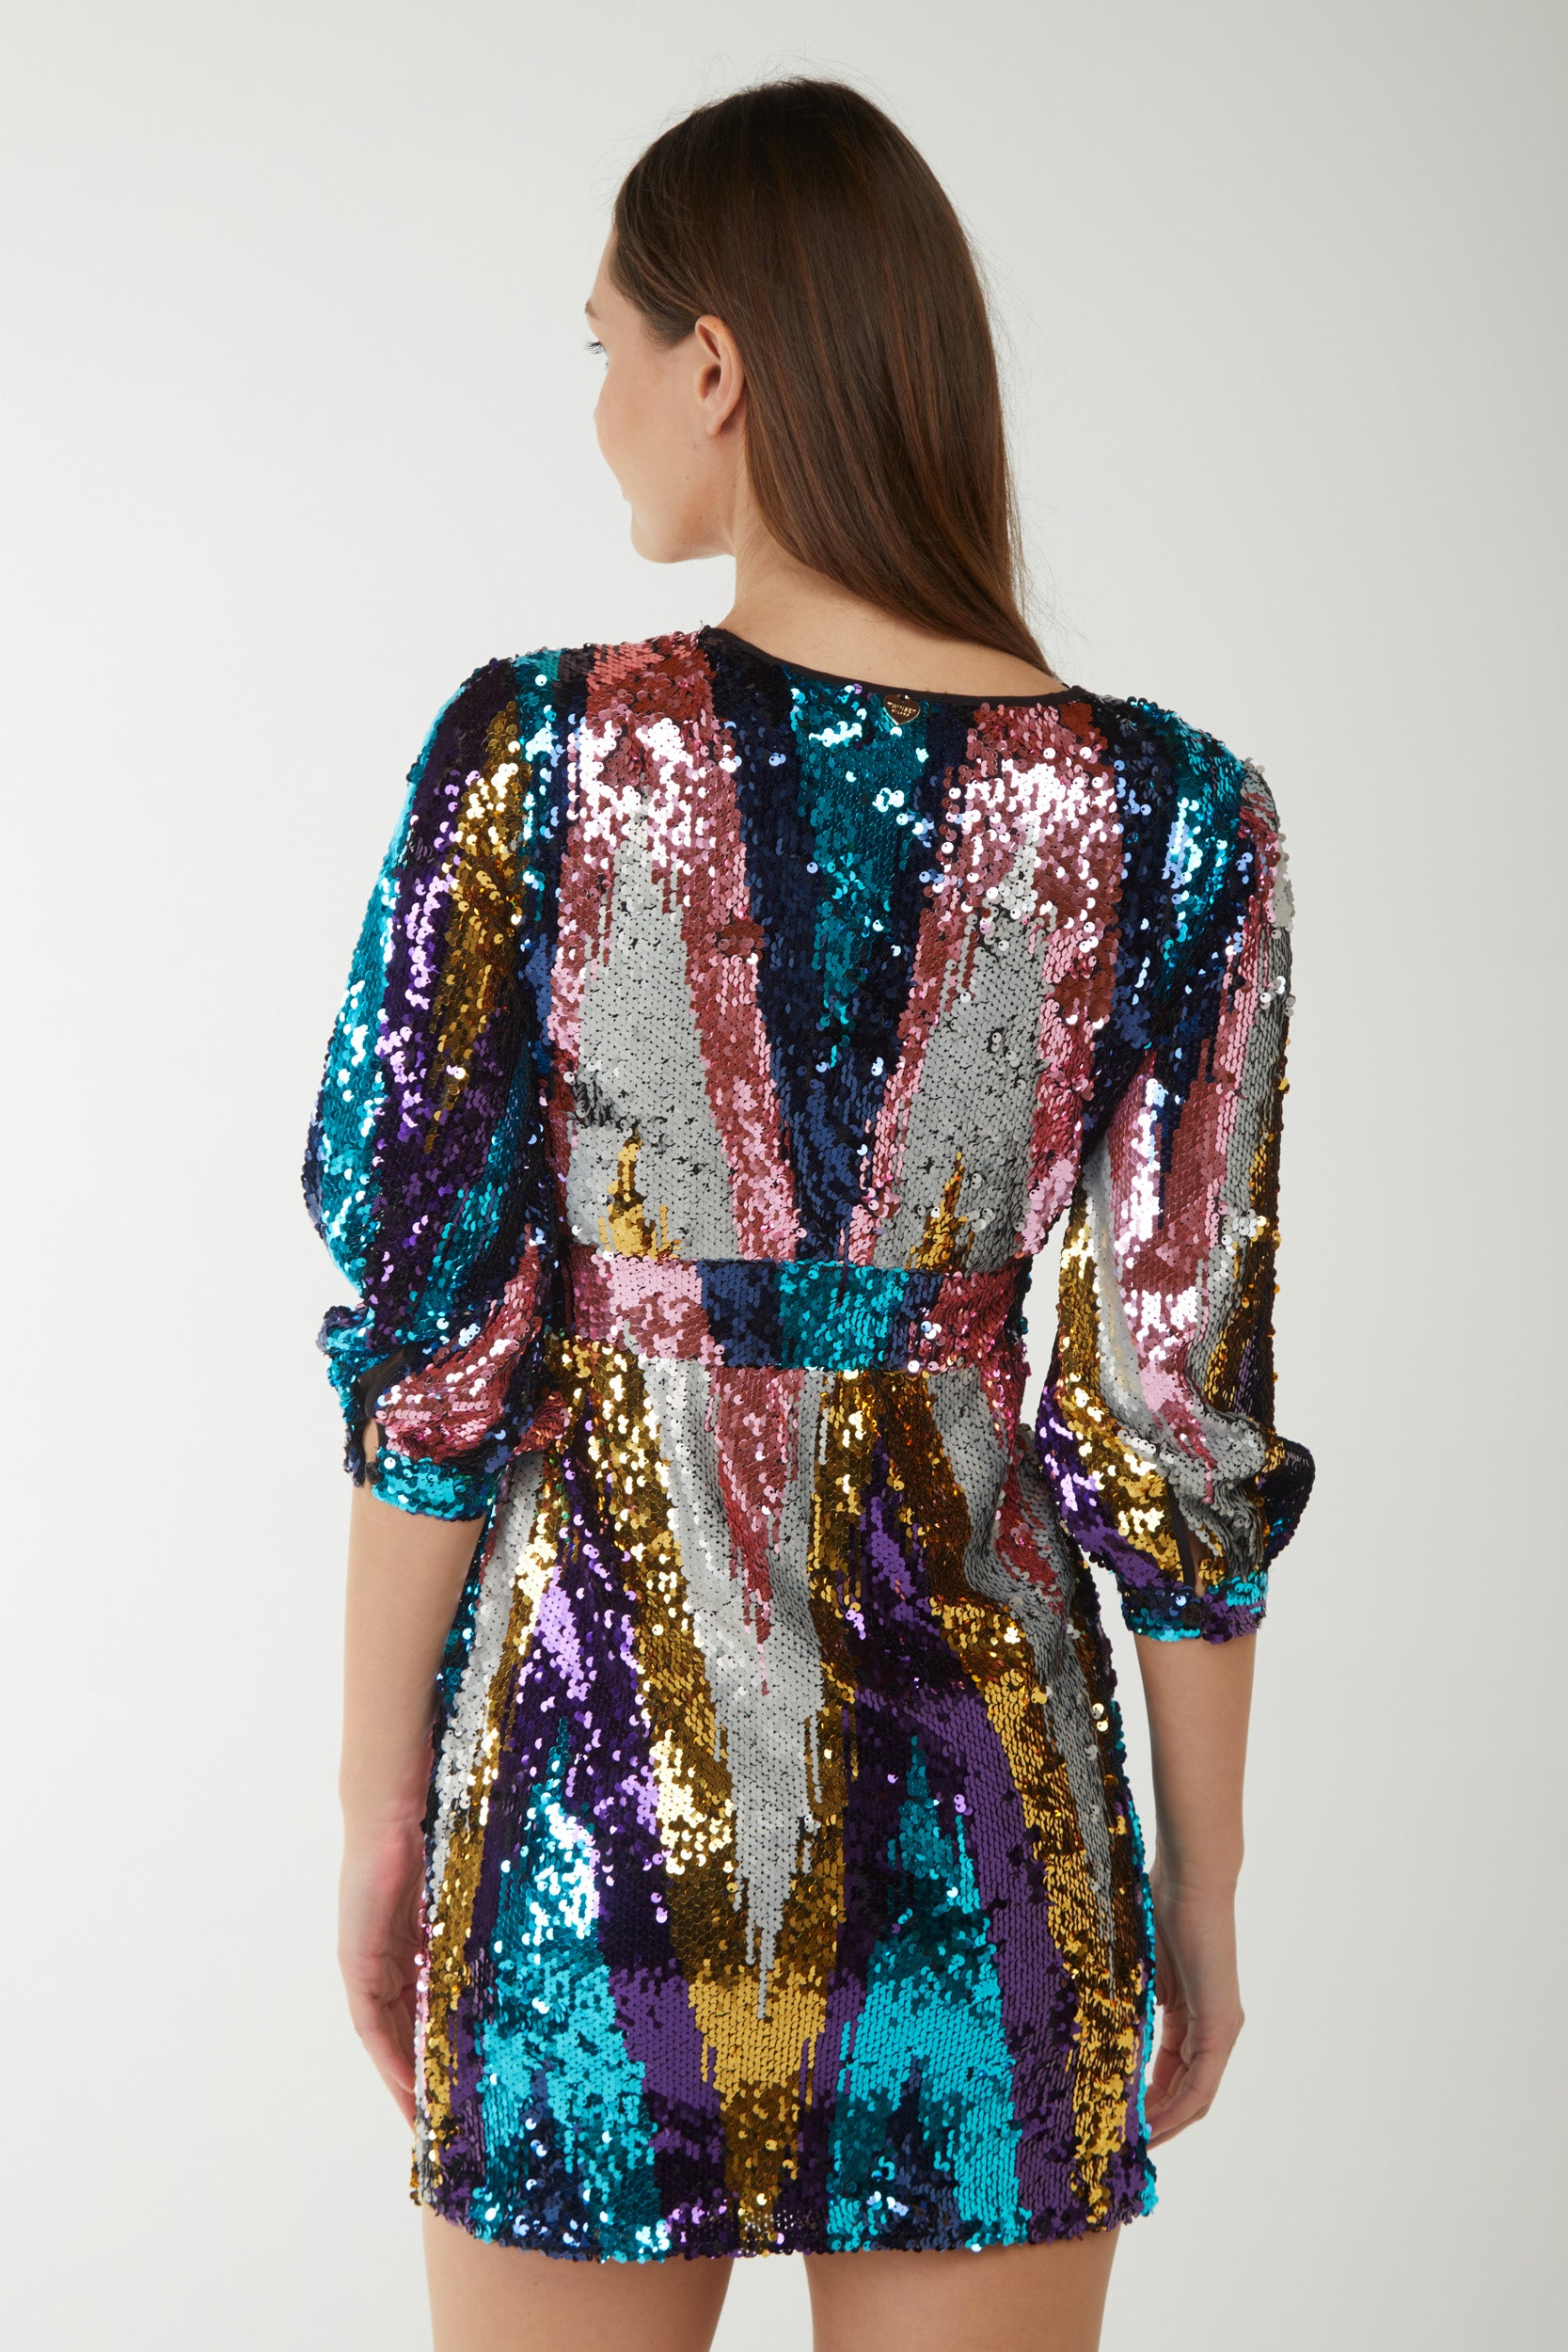 TWINSET Dress in multicolor full sequins